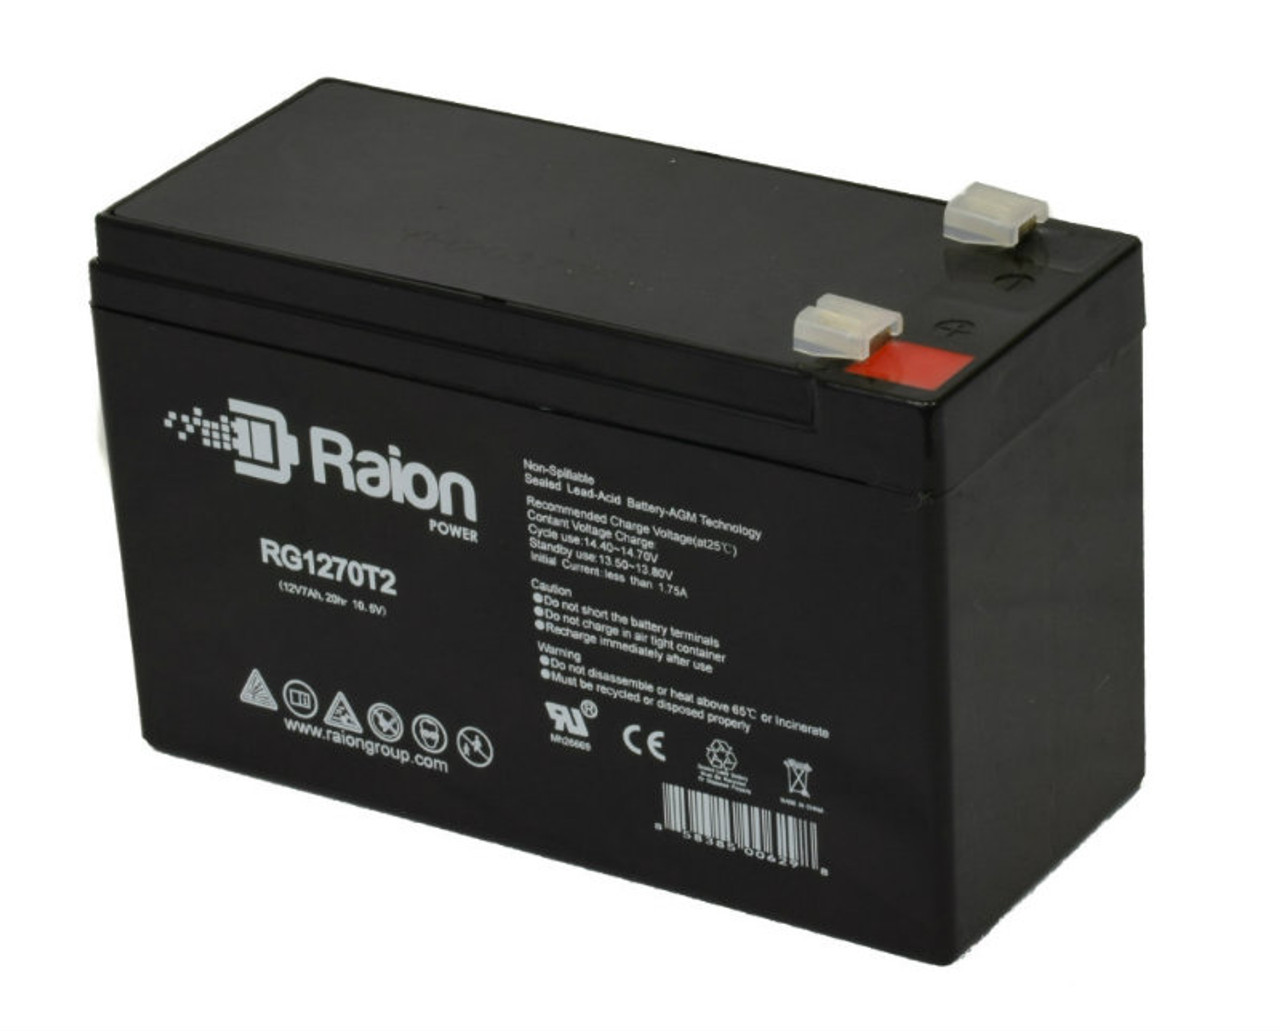 Raion Power Replacement 12V 7Ah Battery for Narco Narkomed Anesthesia 3B - 1 Pack